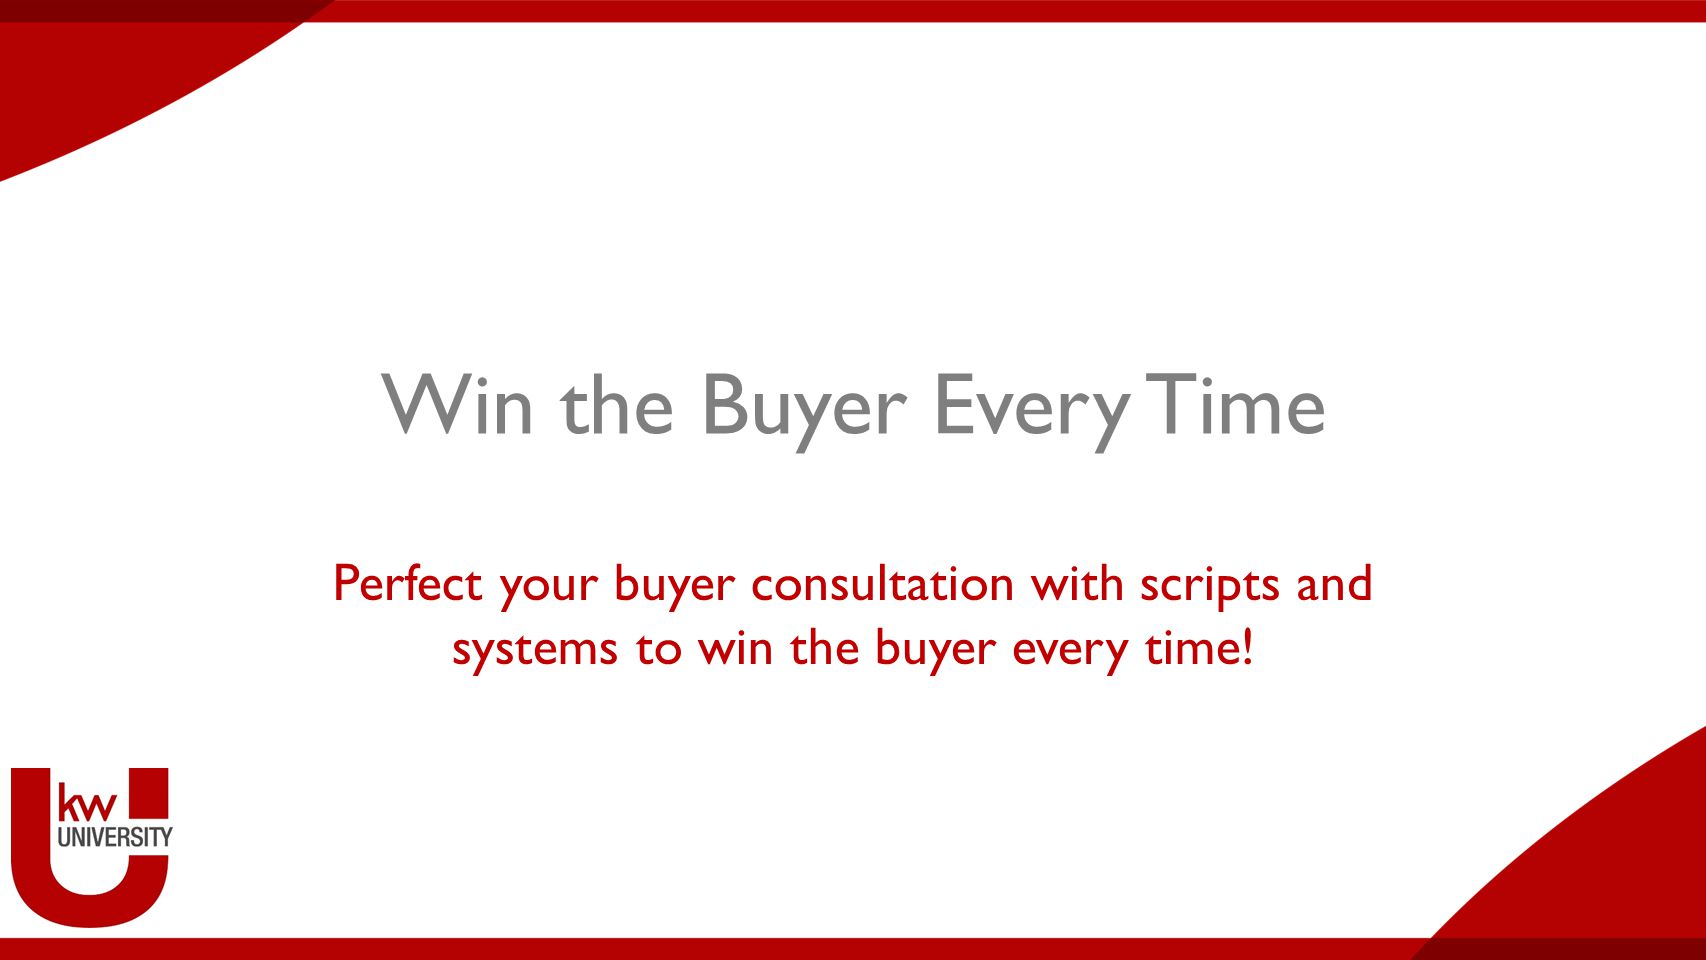 Win the Buyer Every Time